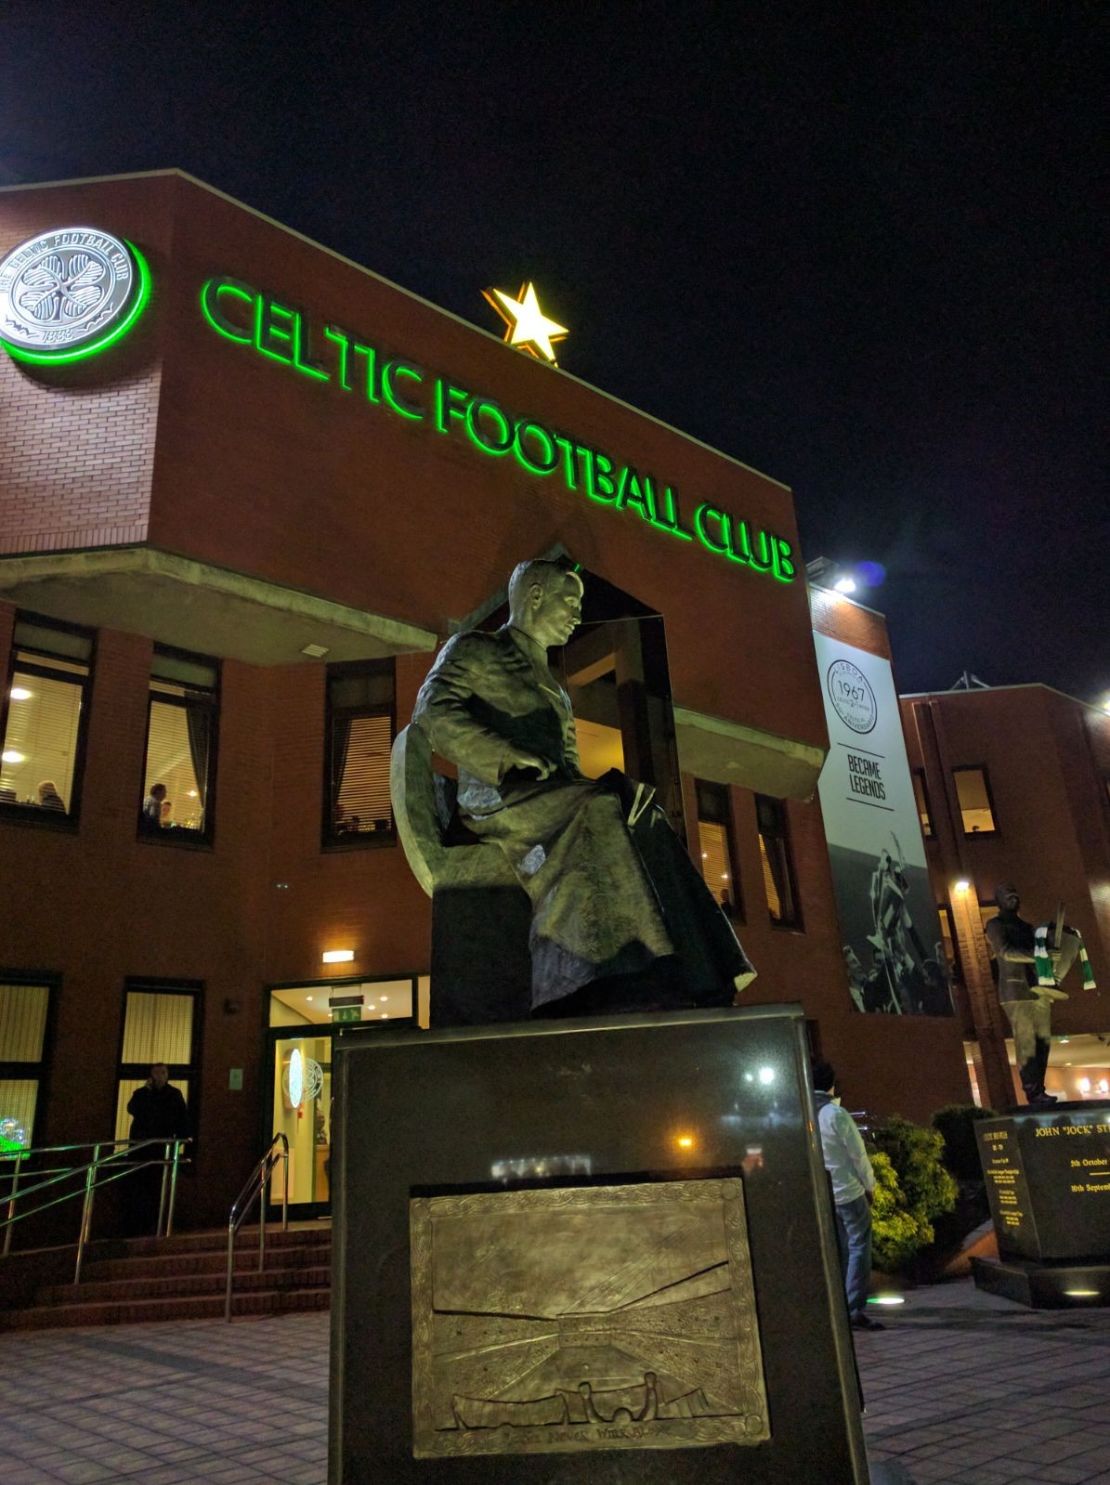 The stadium features a statue of Brother Walfrid, the Irish Roman Catholic who founded Celtic in 1887.